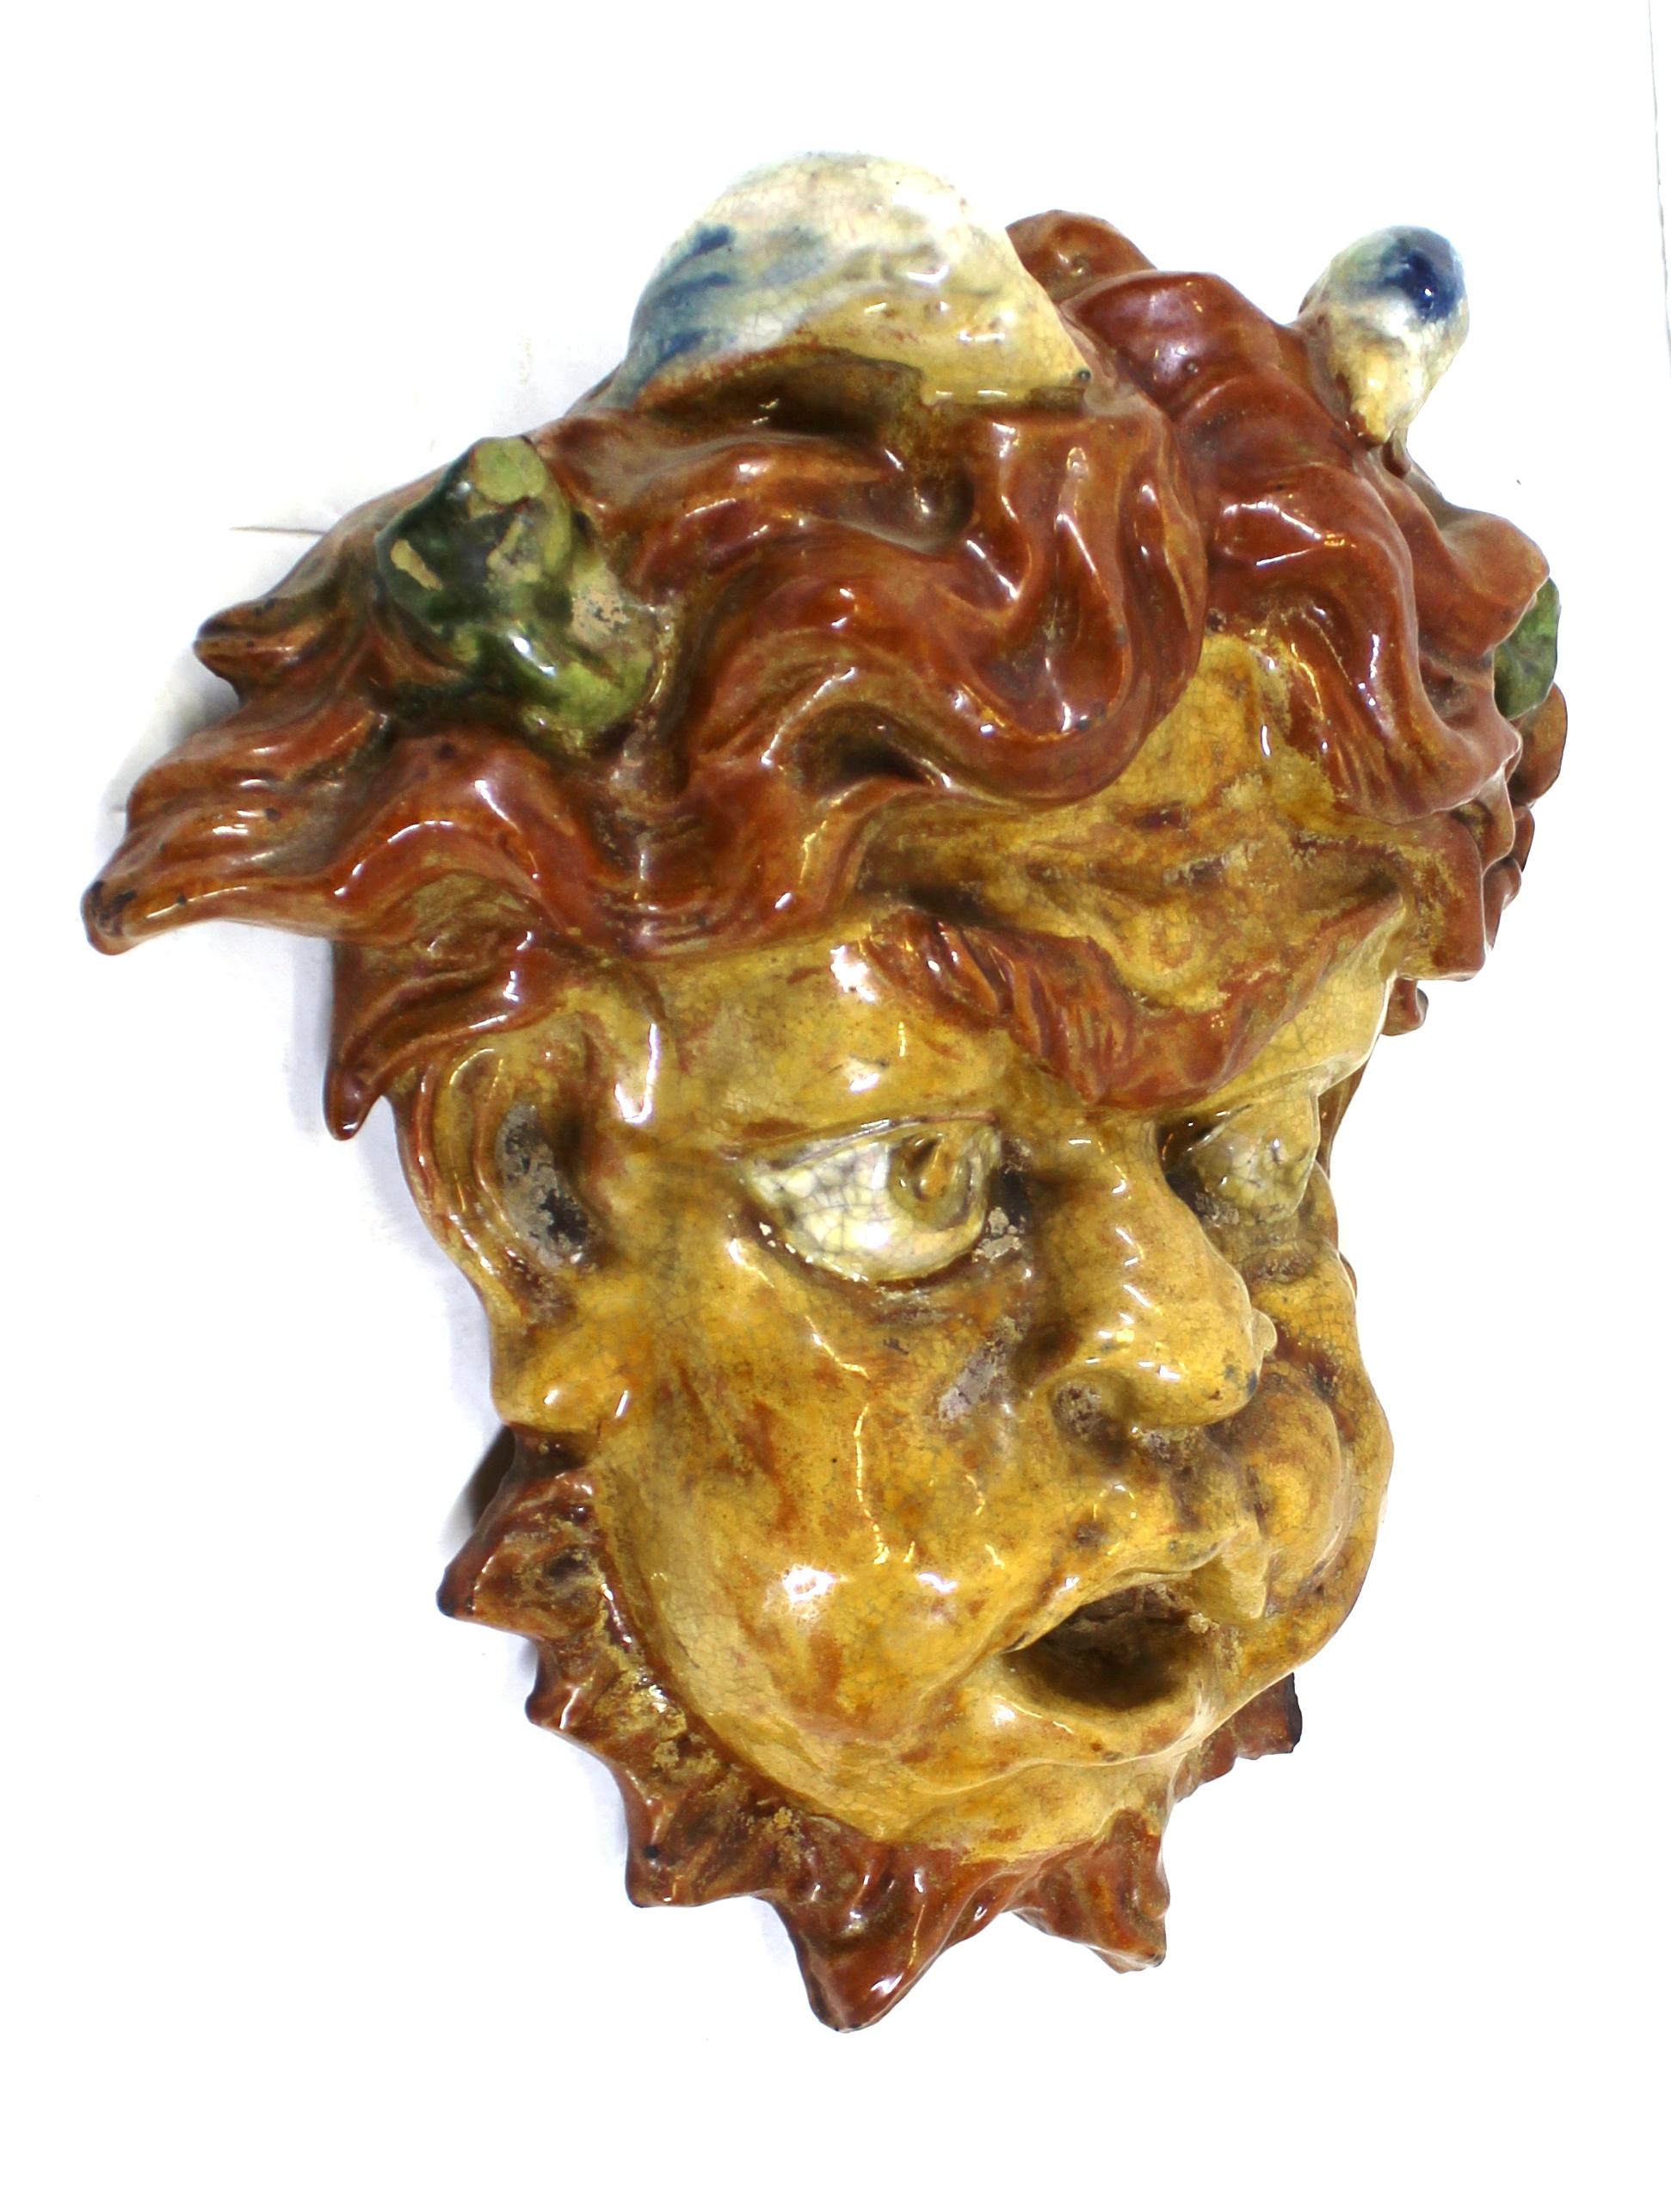 Italian Baroque Revival 19th century puck mask, made in glazed and painted terracotta. The piece can be mounted on a wall. In great antique condition with minor antique repair work.